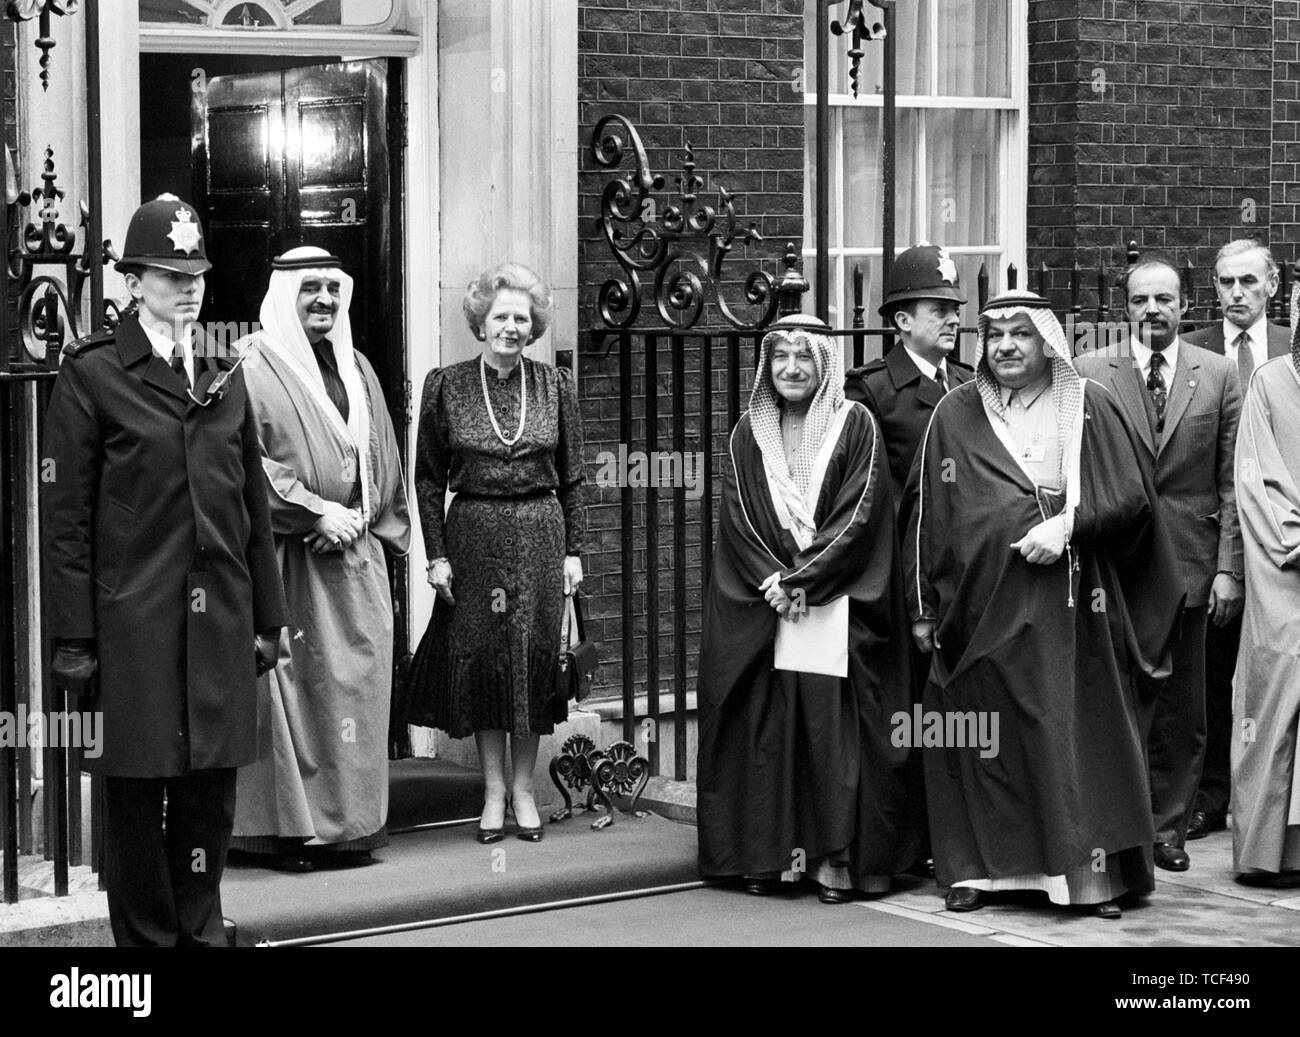 King Fahd of Saudi Arabia, who arrived in Britain yesterday for a four-day state visit, meets Prime Minister Margaret Thatcher at 10 Downing Street, London. Stock Photo